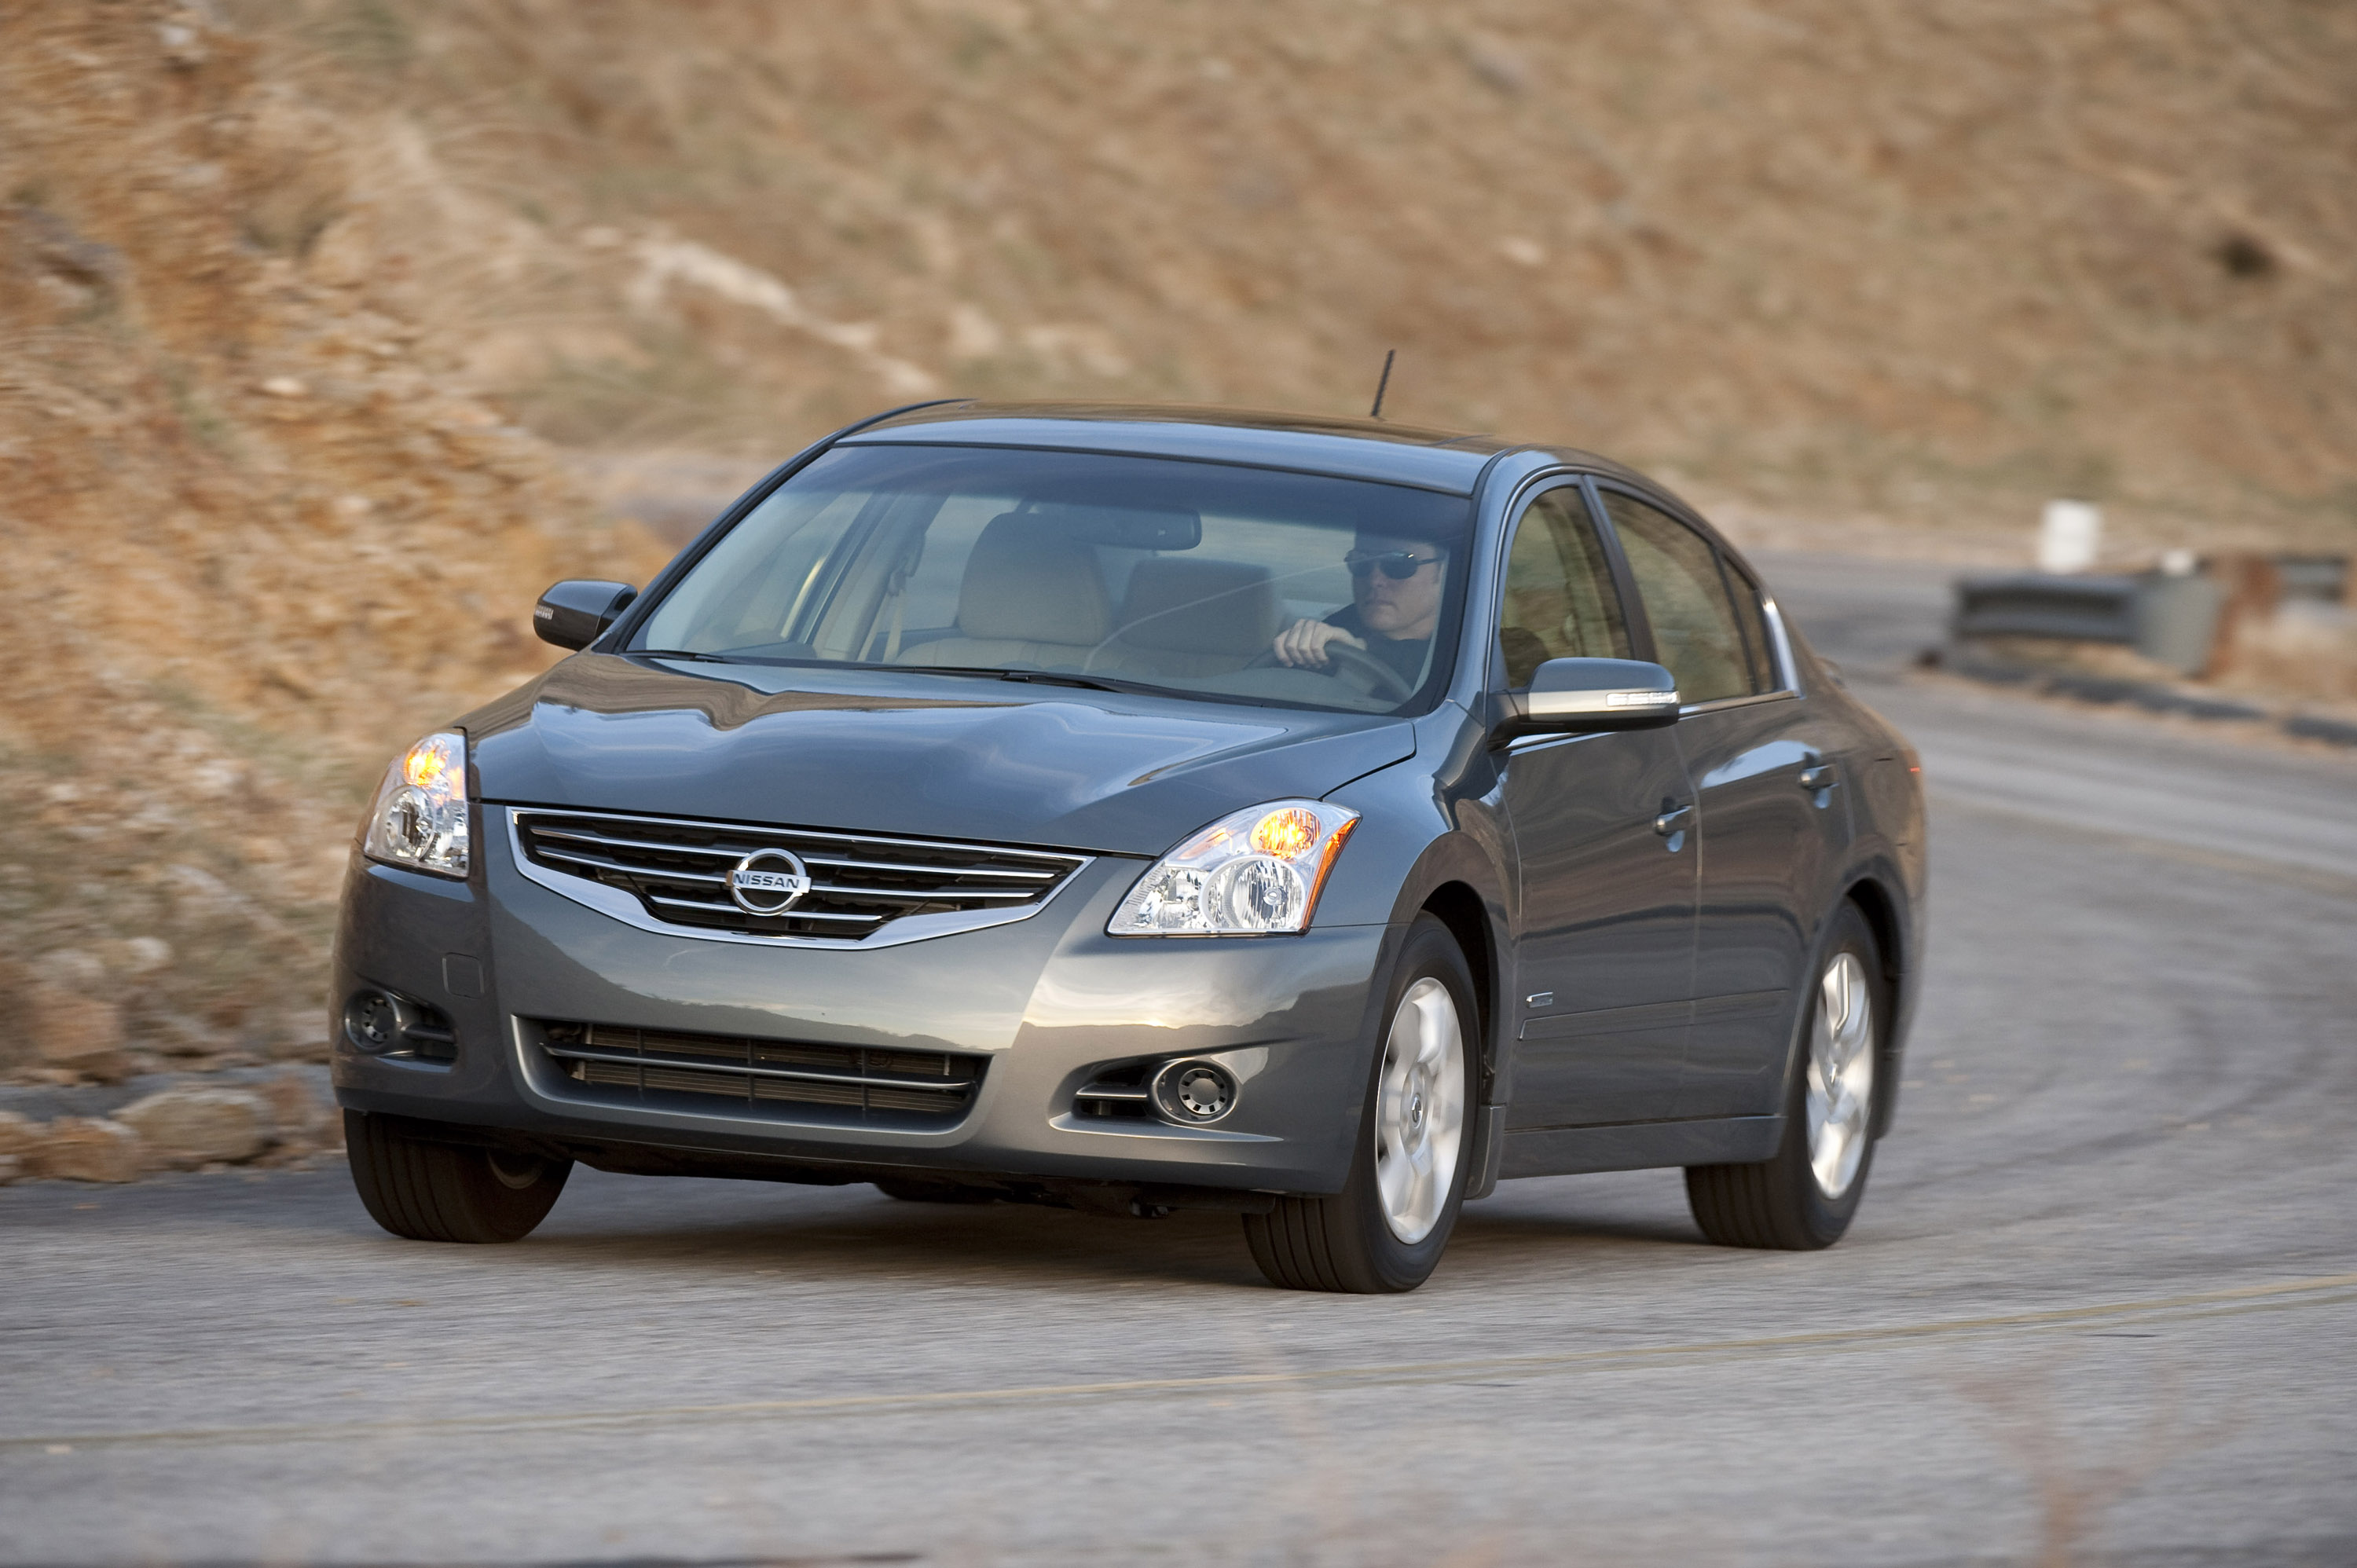 Where is the nissan altima hybrid manufactured